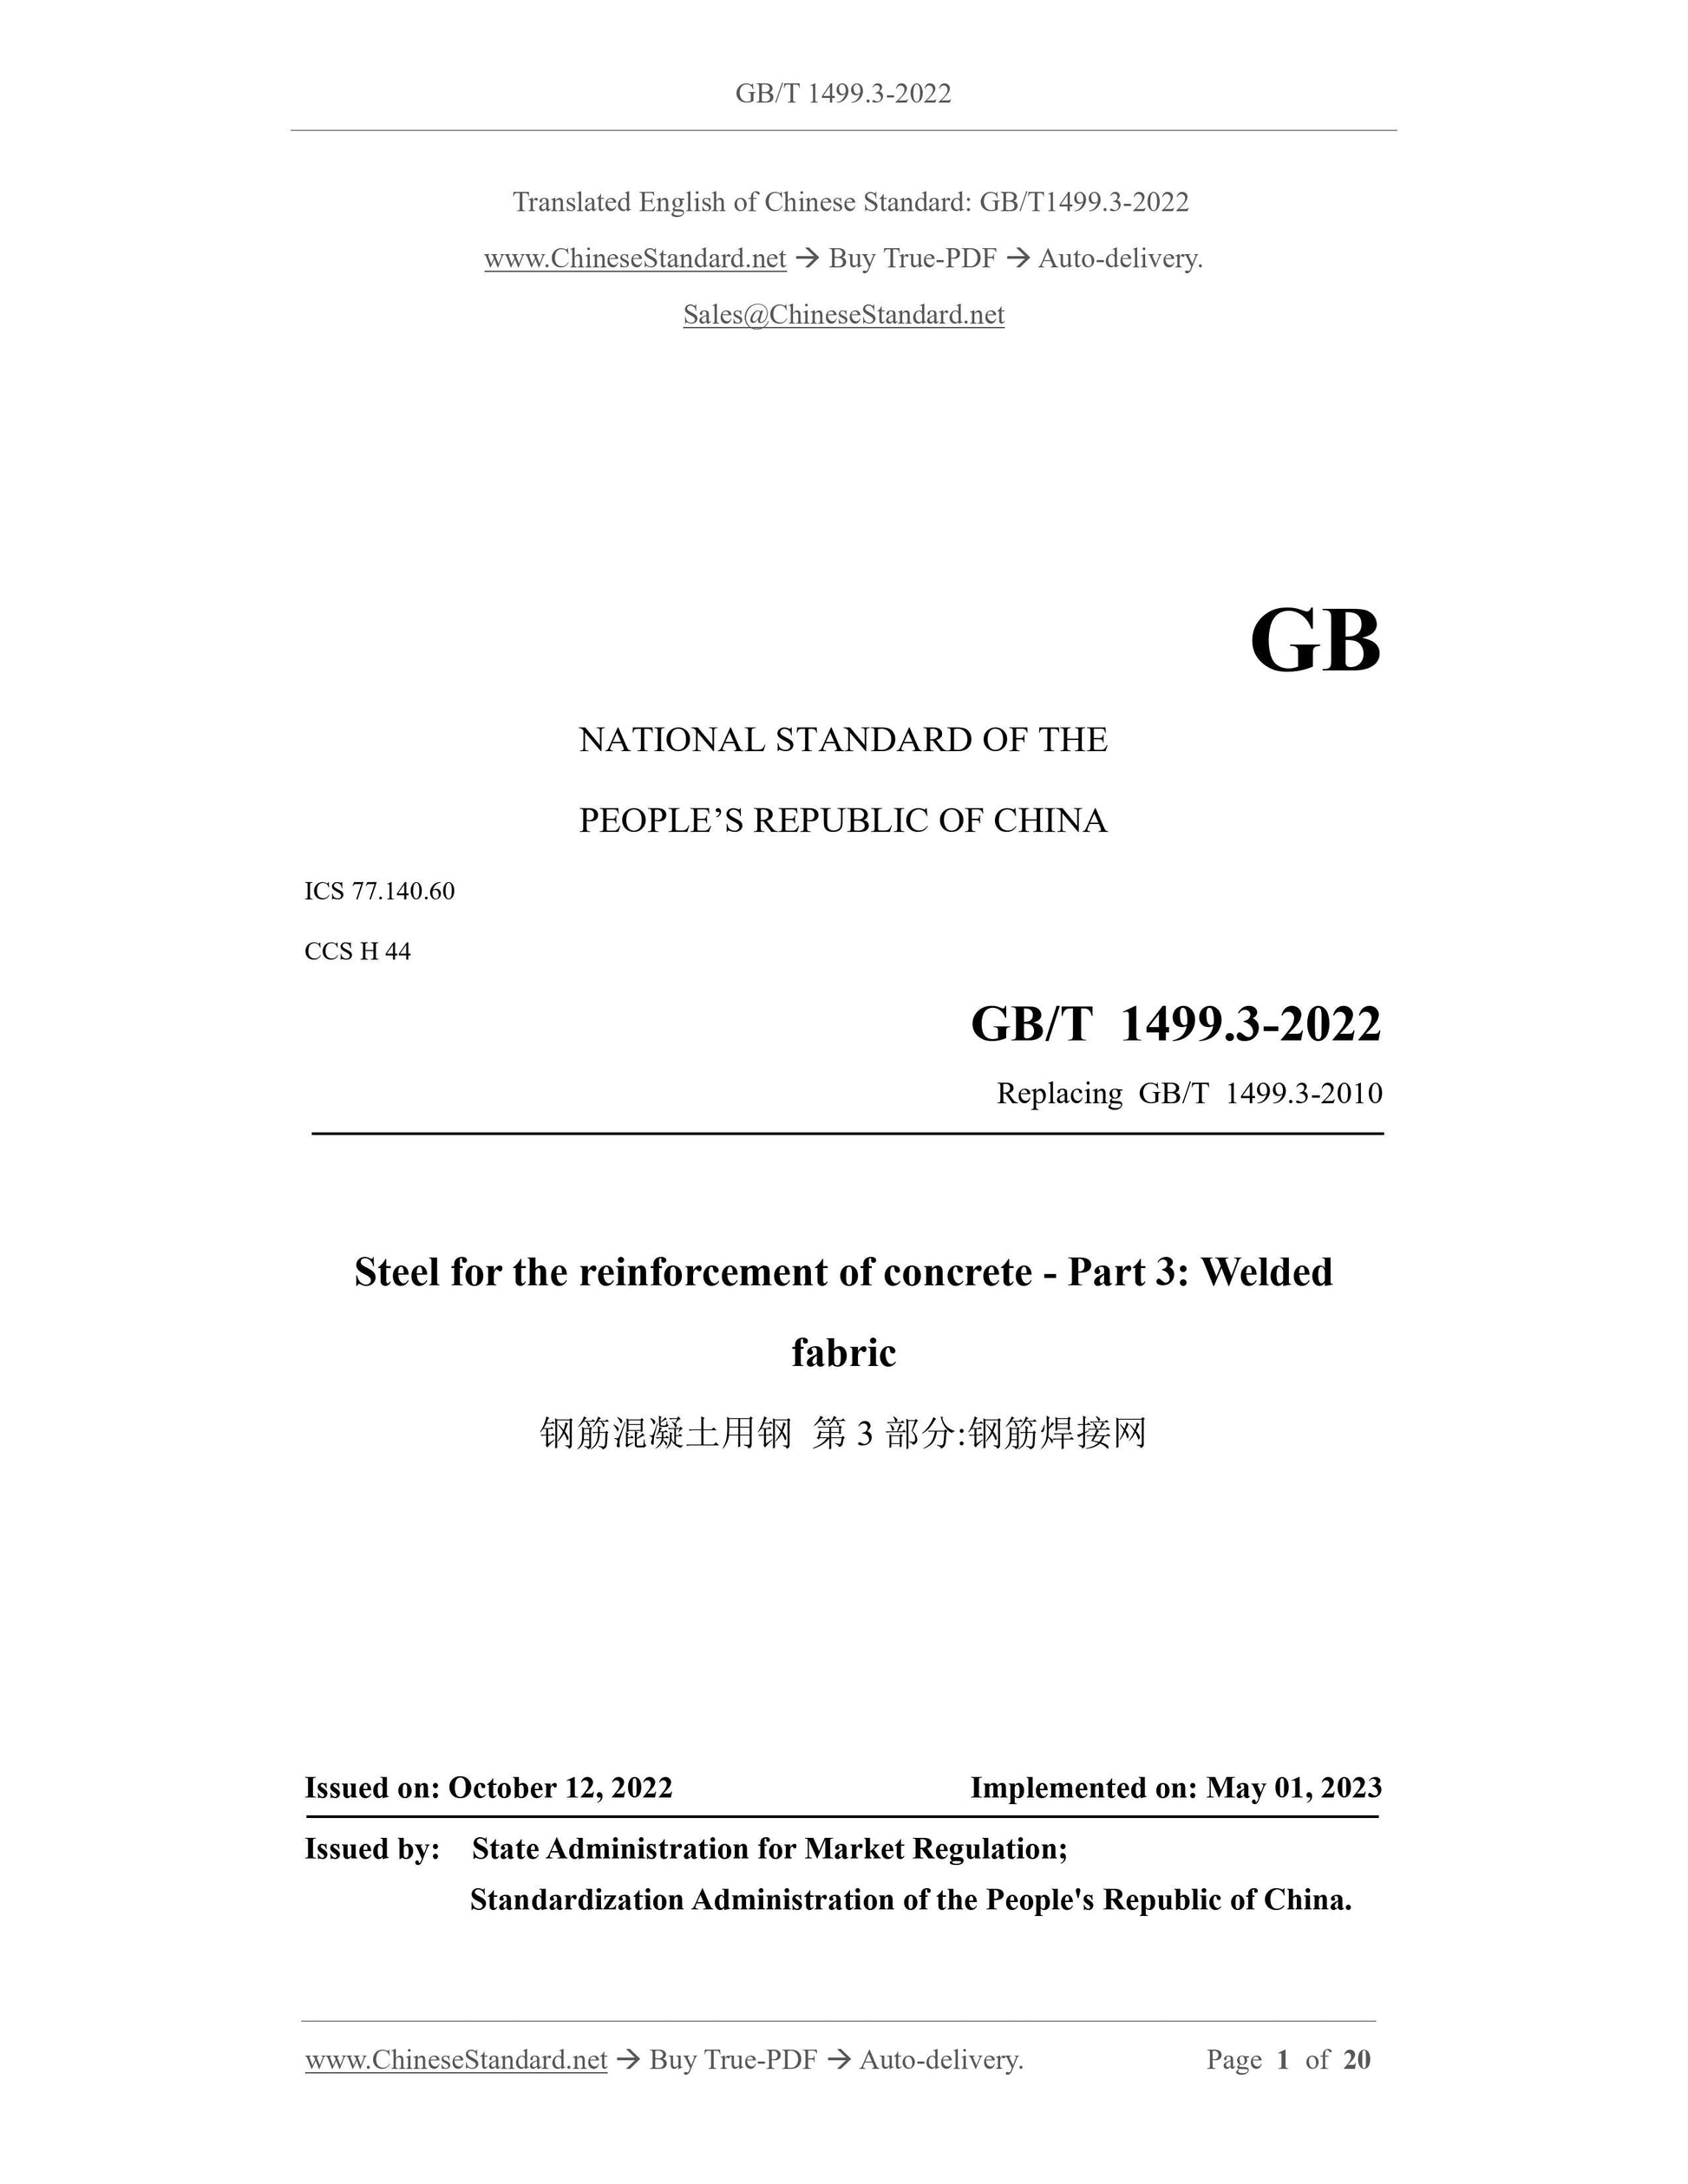 GB/T 1499.3-2022 Page 1